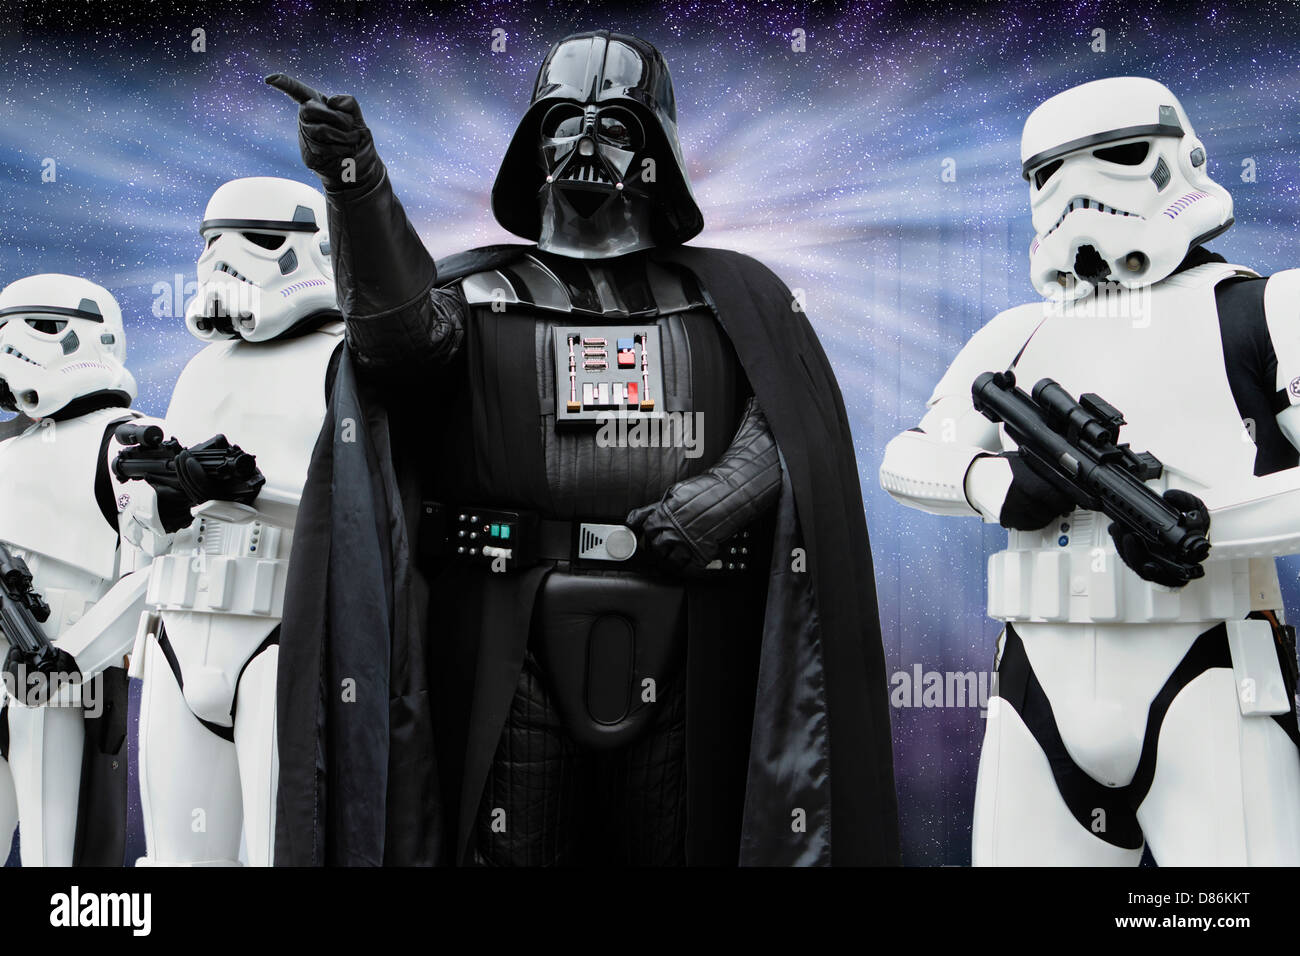 Star Wars Darth Vader and Imperial Stormtrooper characters Stock Photo